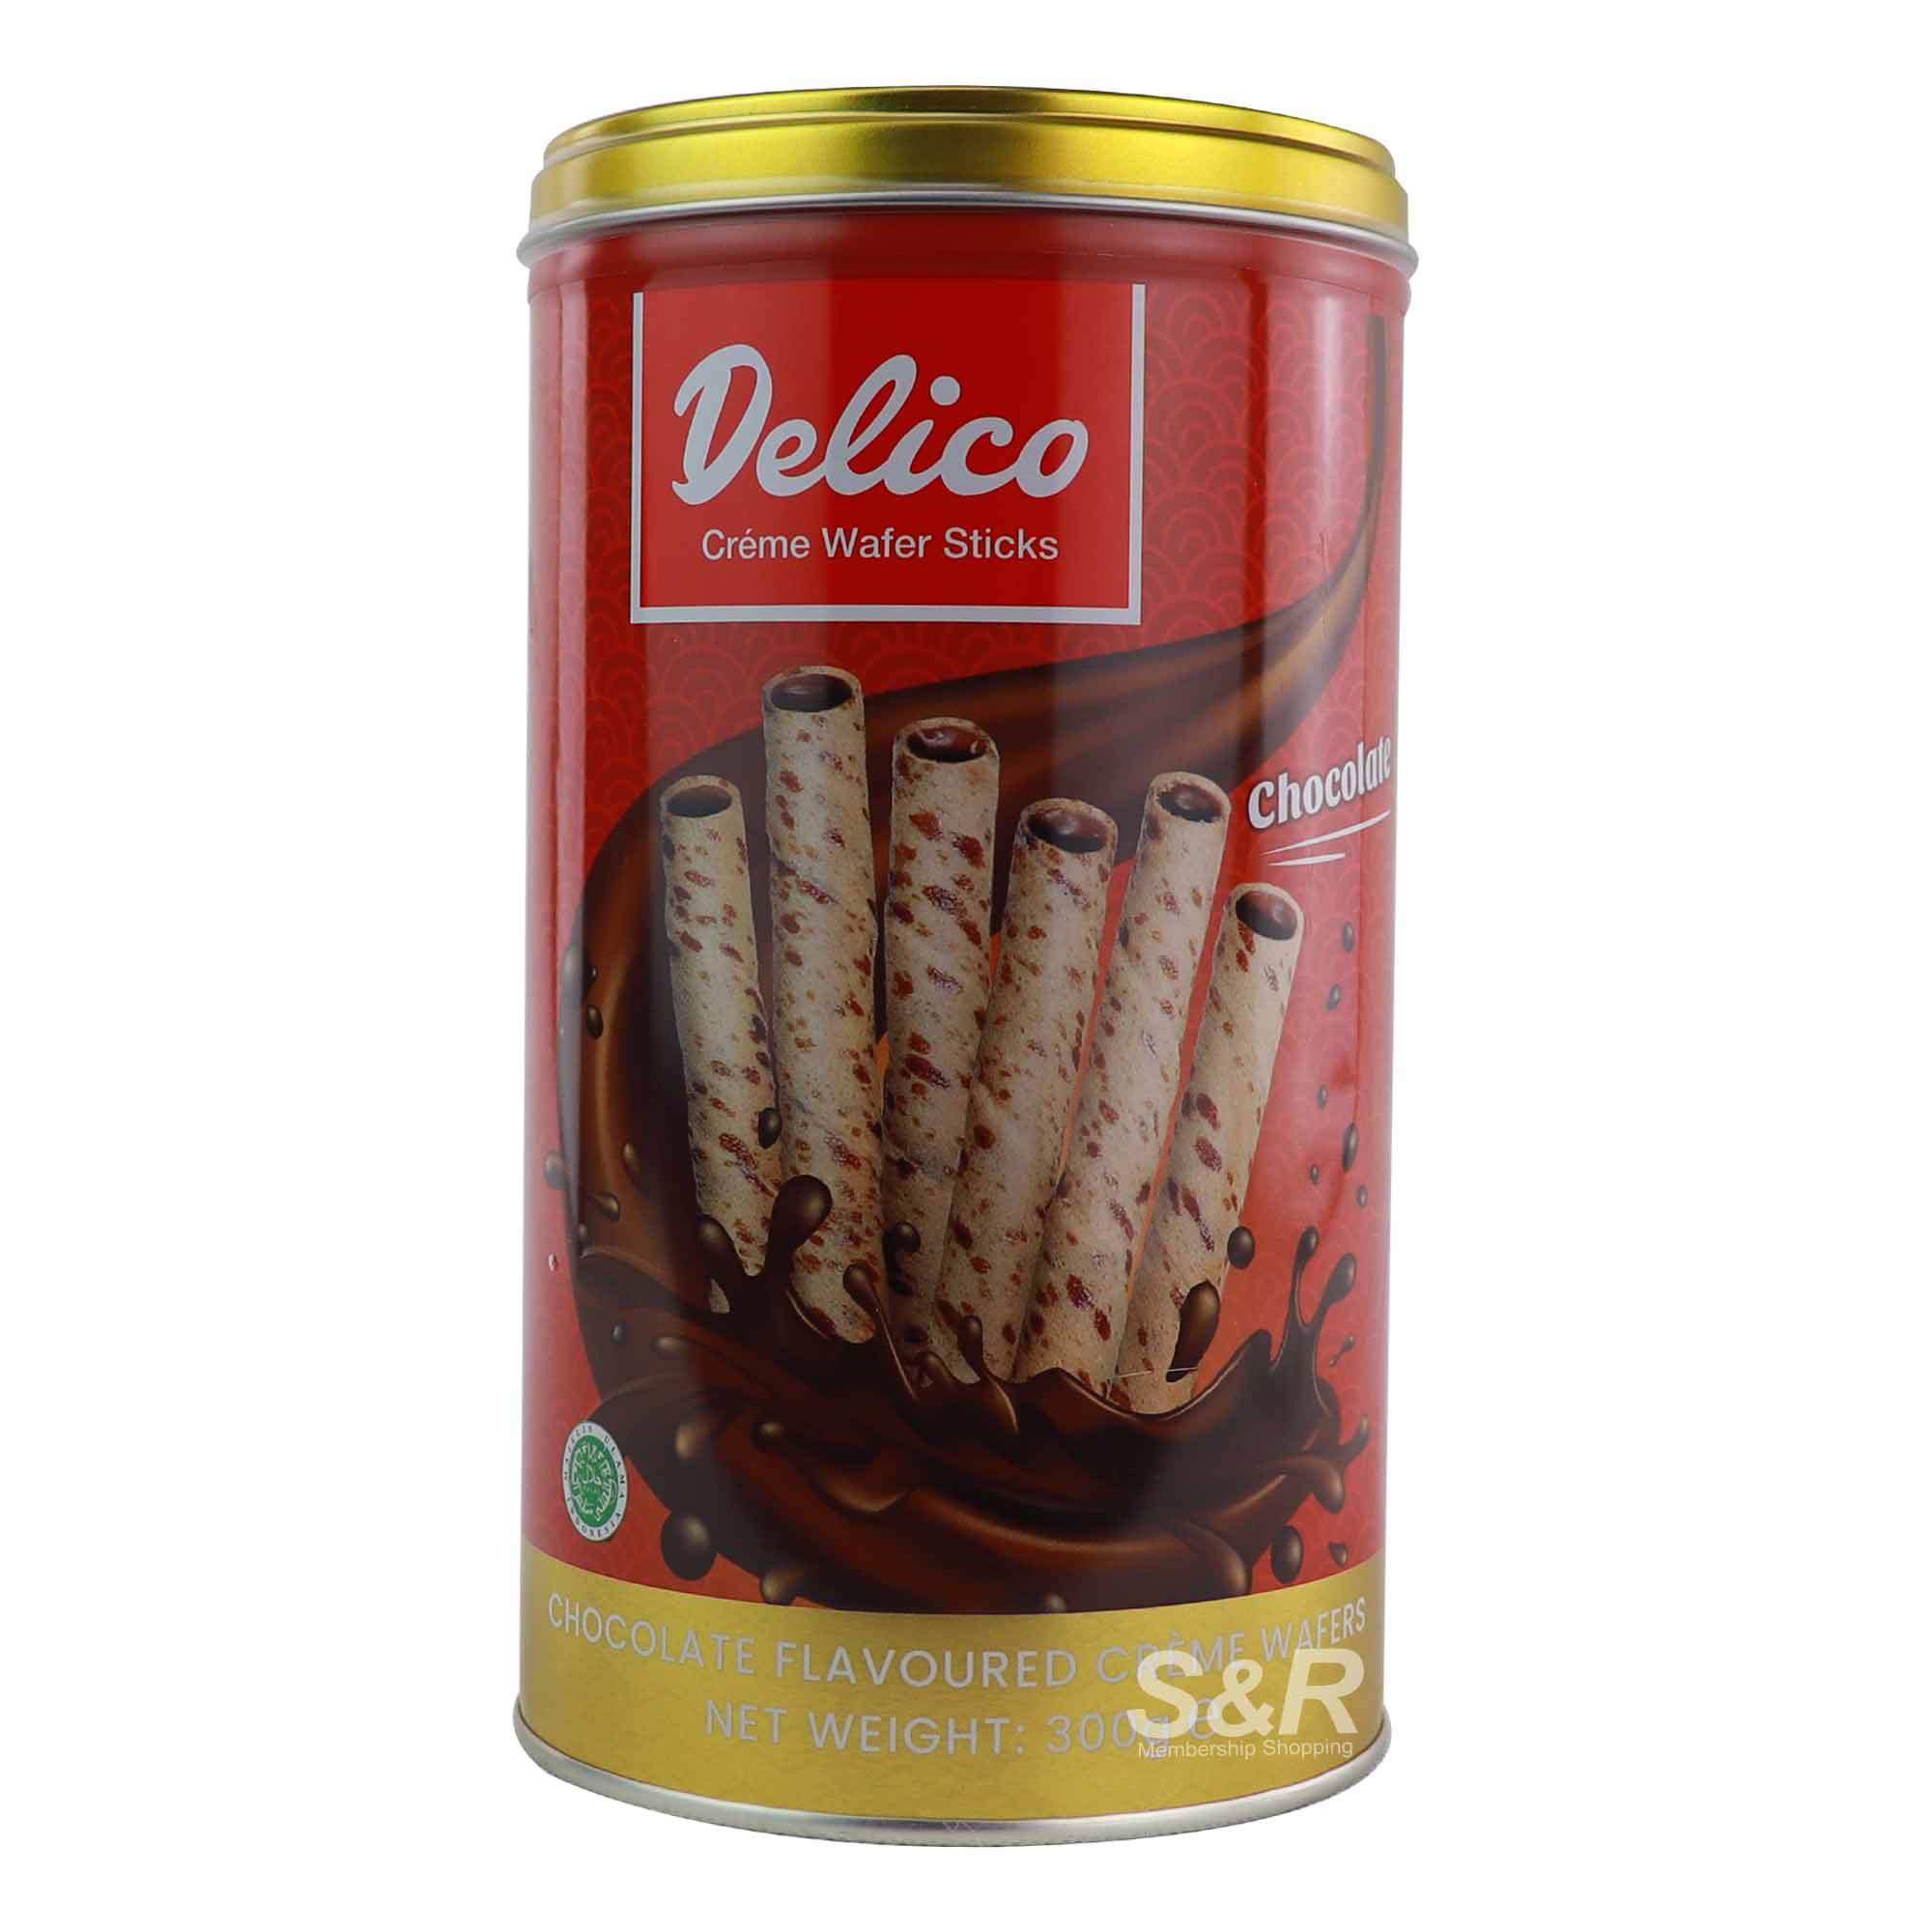 Delico Chocolate Flavored Creme Wafers 300g